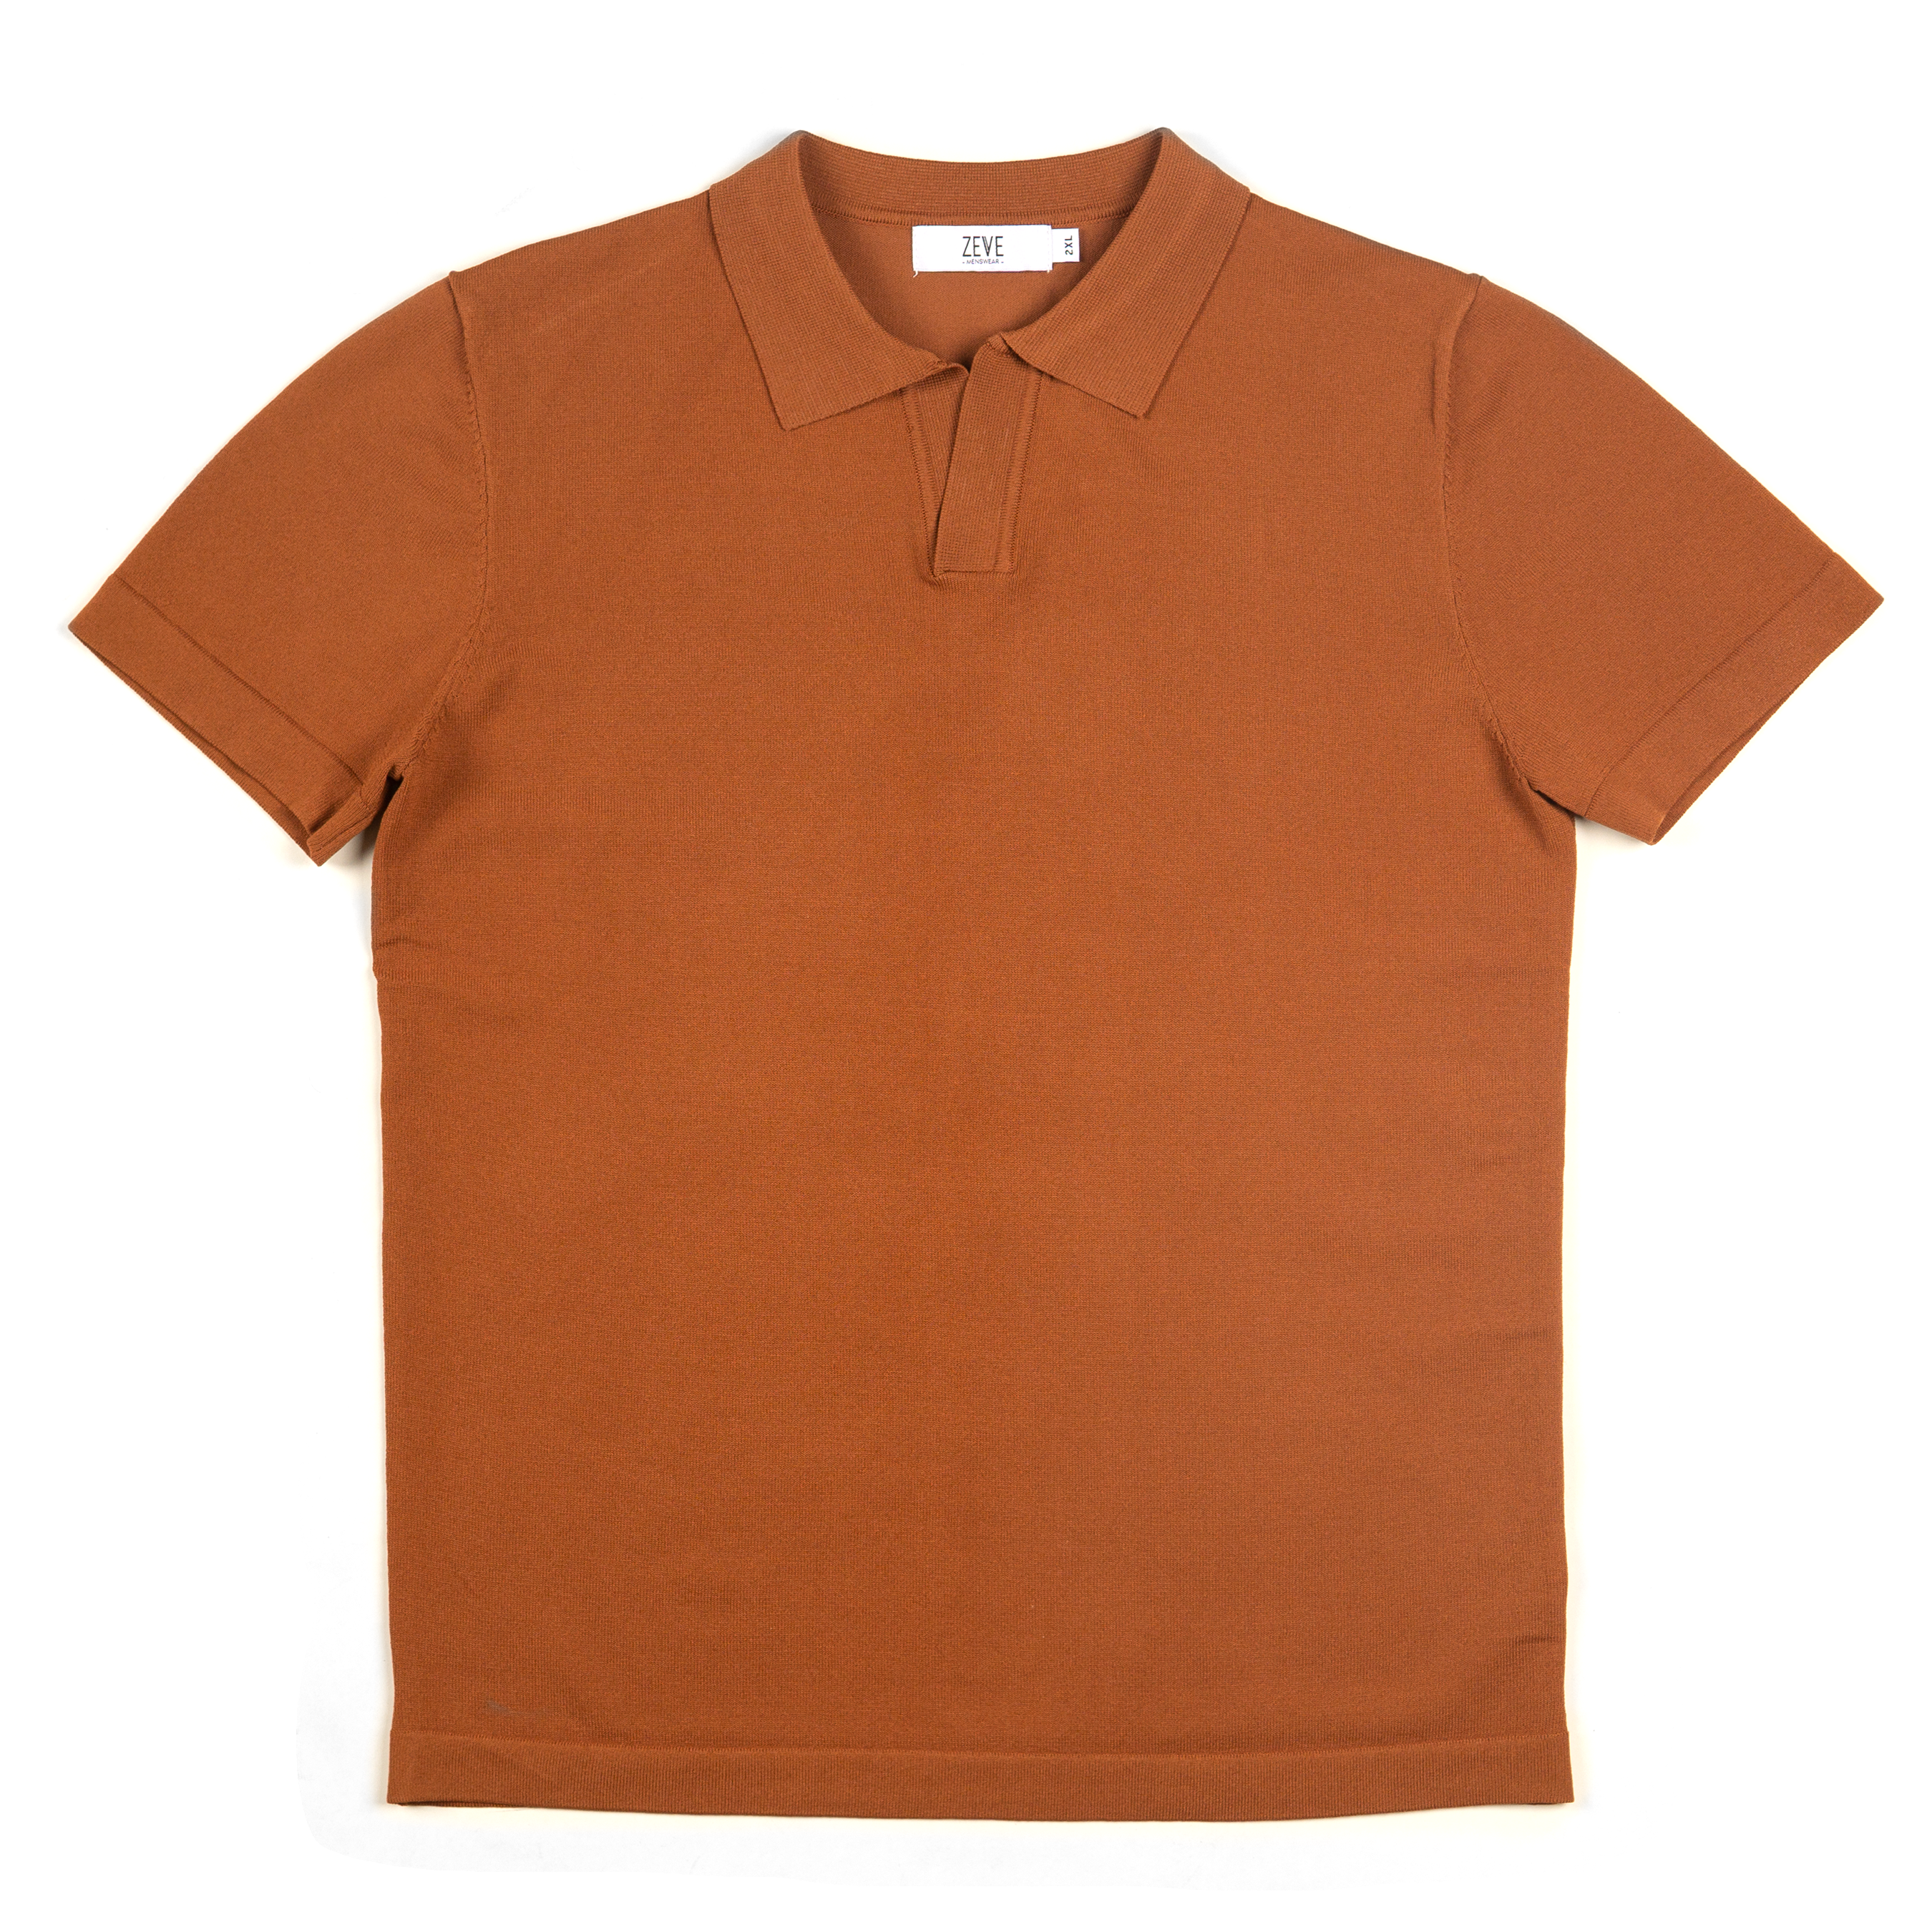 Knit  Polo Tee - Cinnamon Brown Open Collar - Zeve Shoes